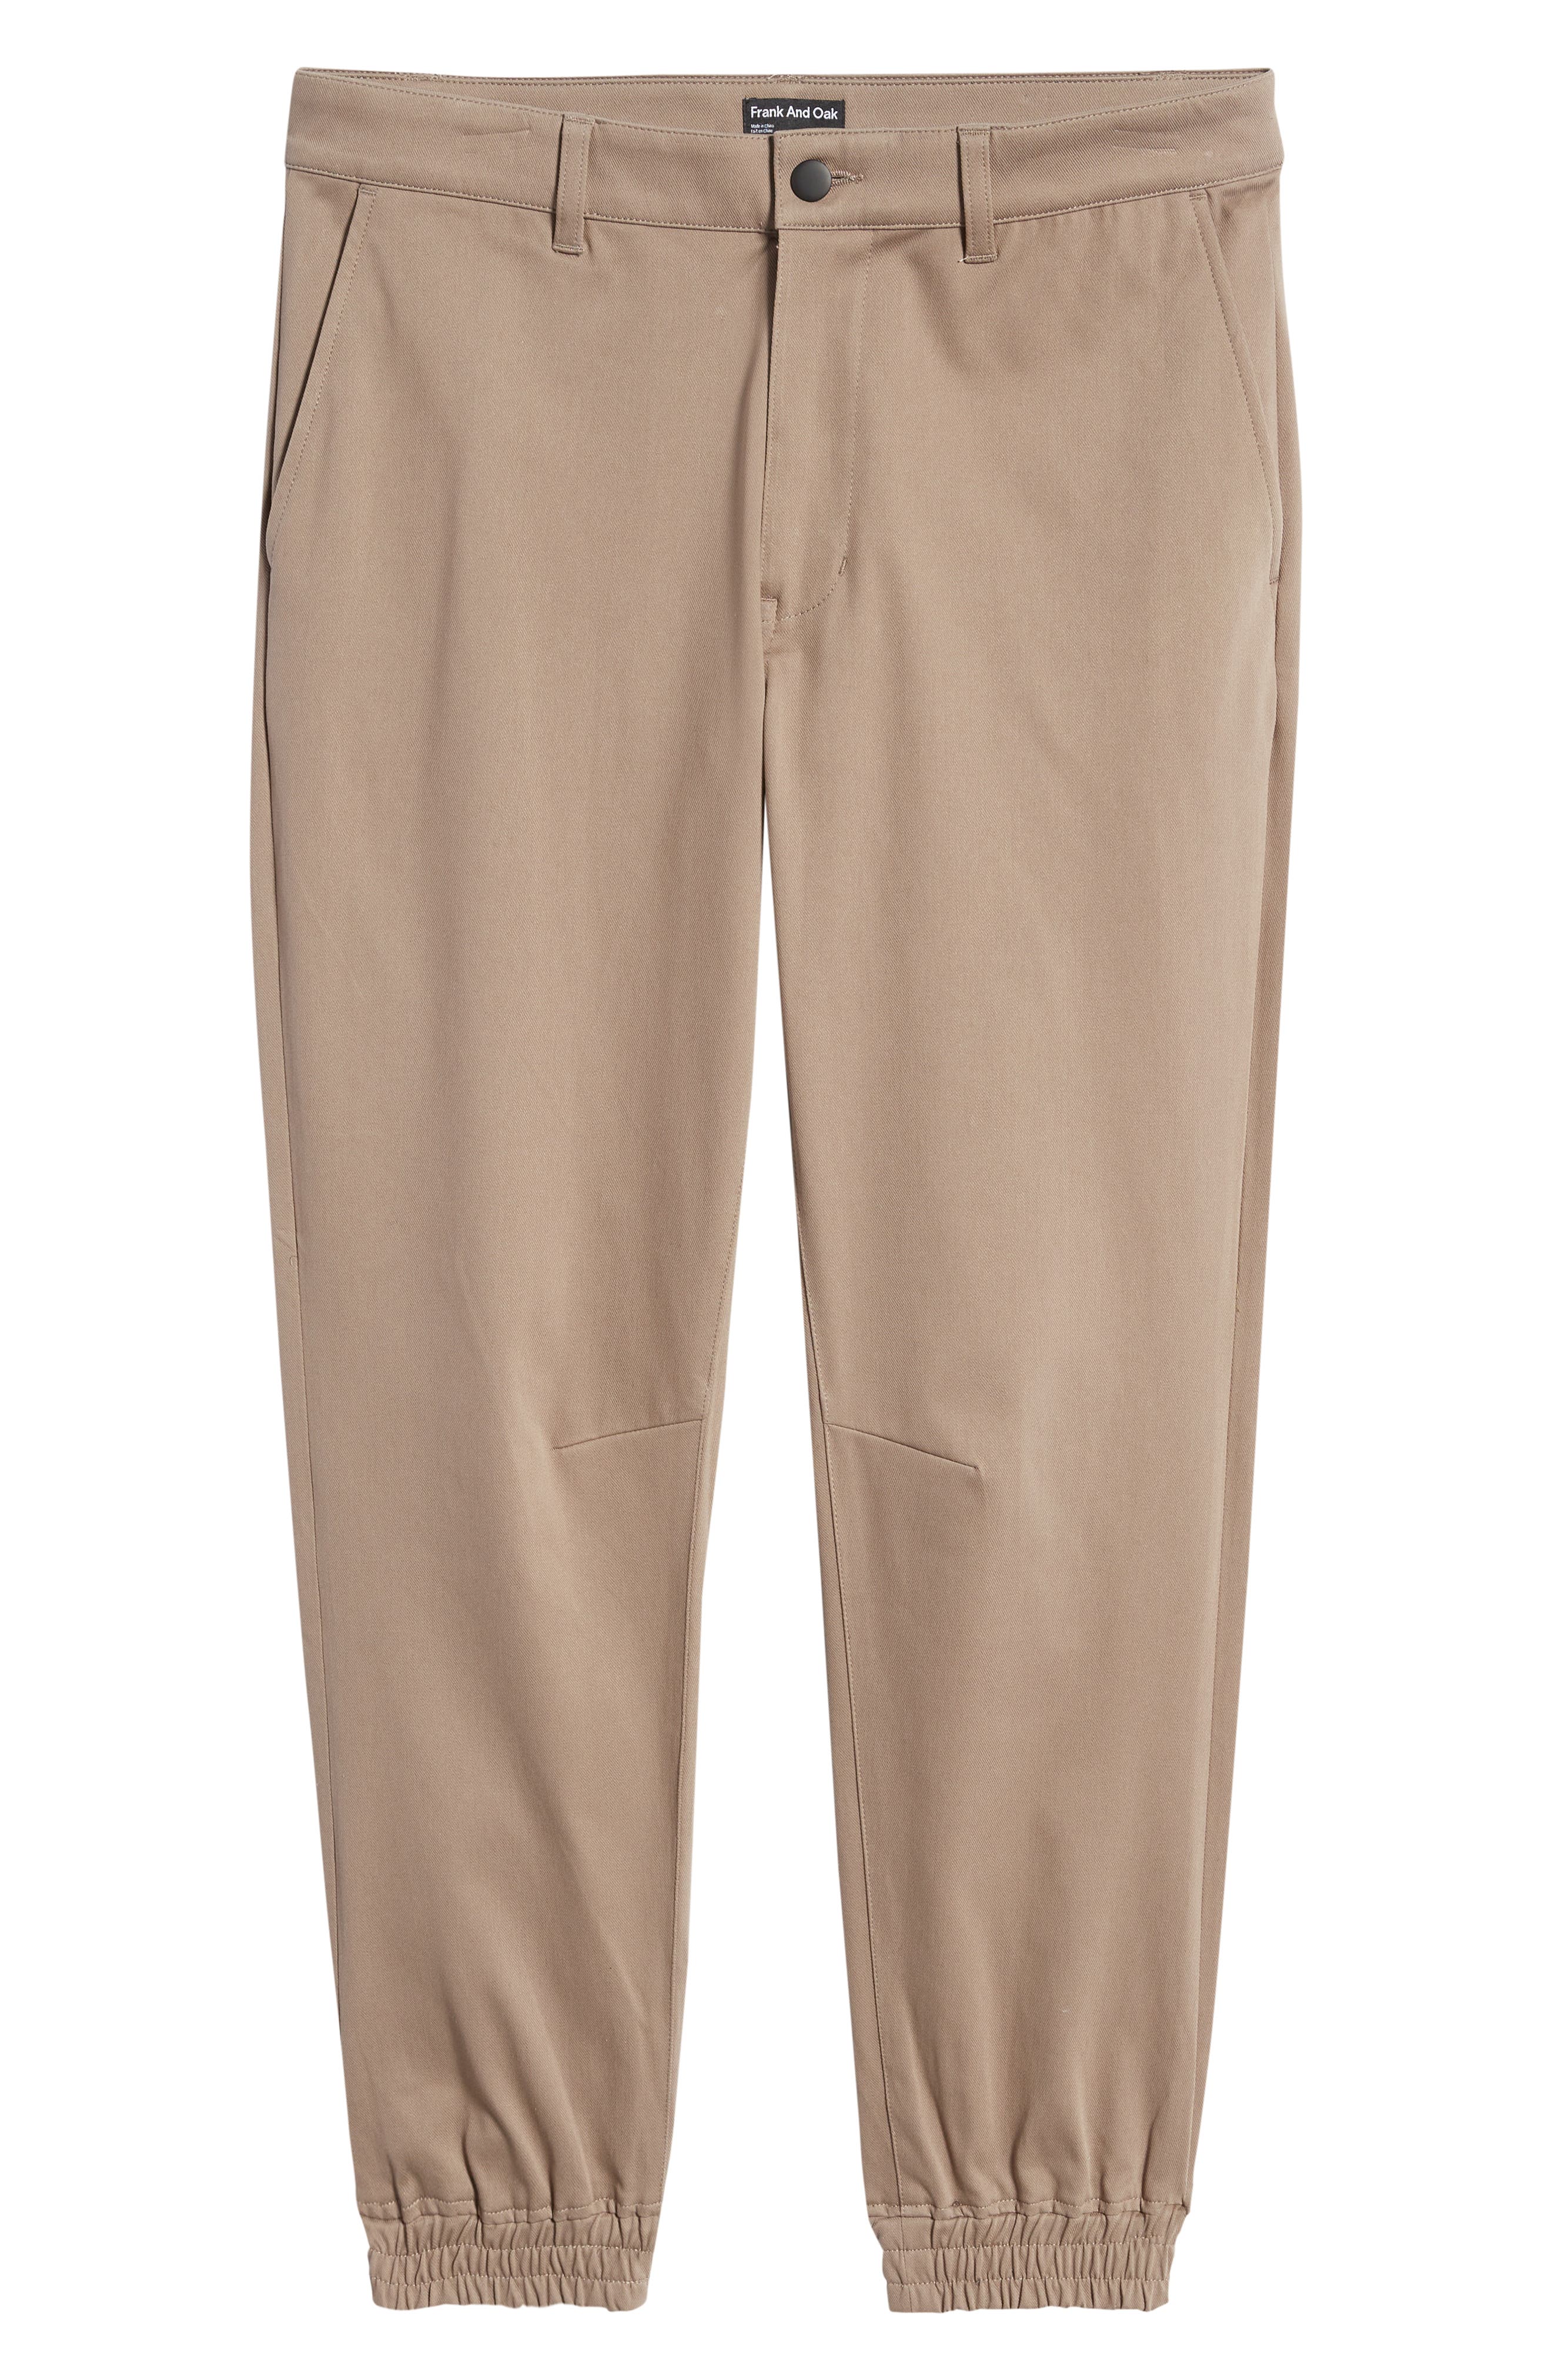 Frank And Oak Flex Stretch Cotton Blend Joggers in Chocolate Chip